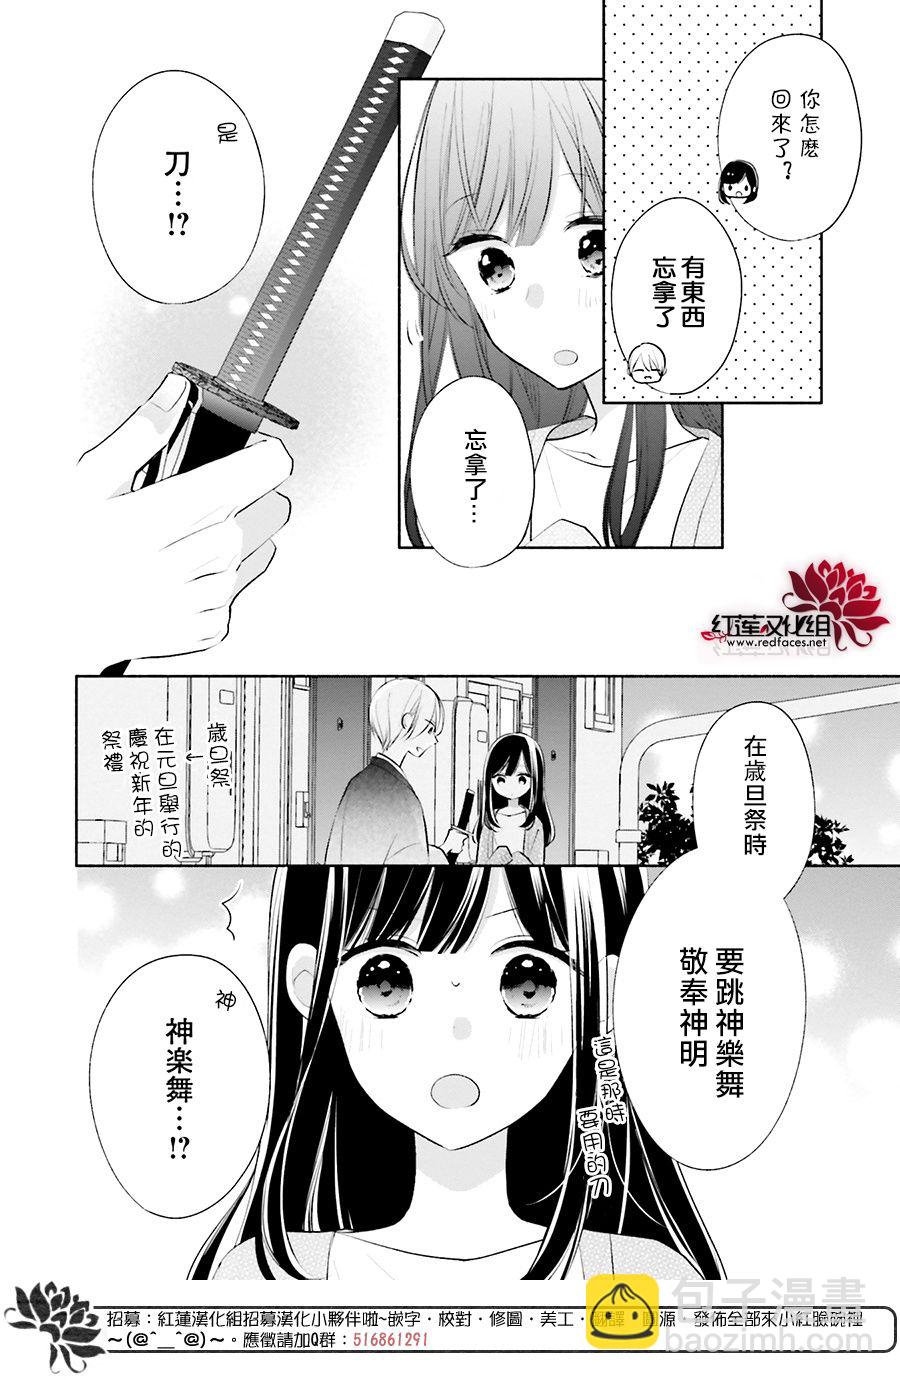 If given a second chance - 24話 - 6